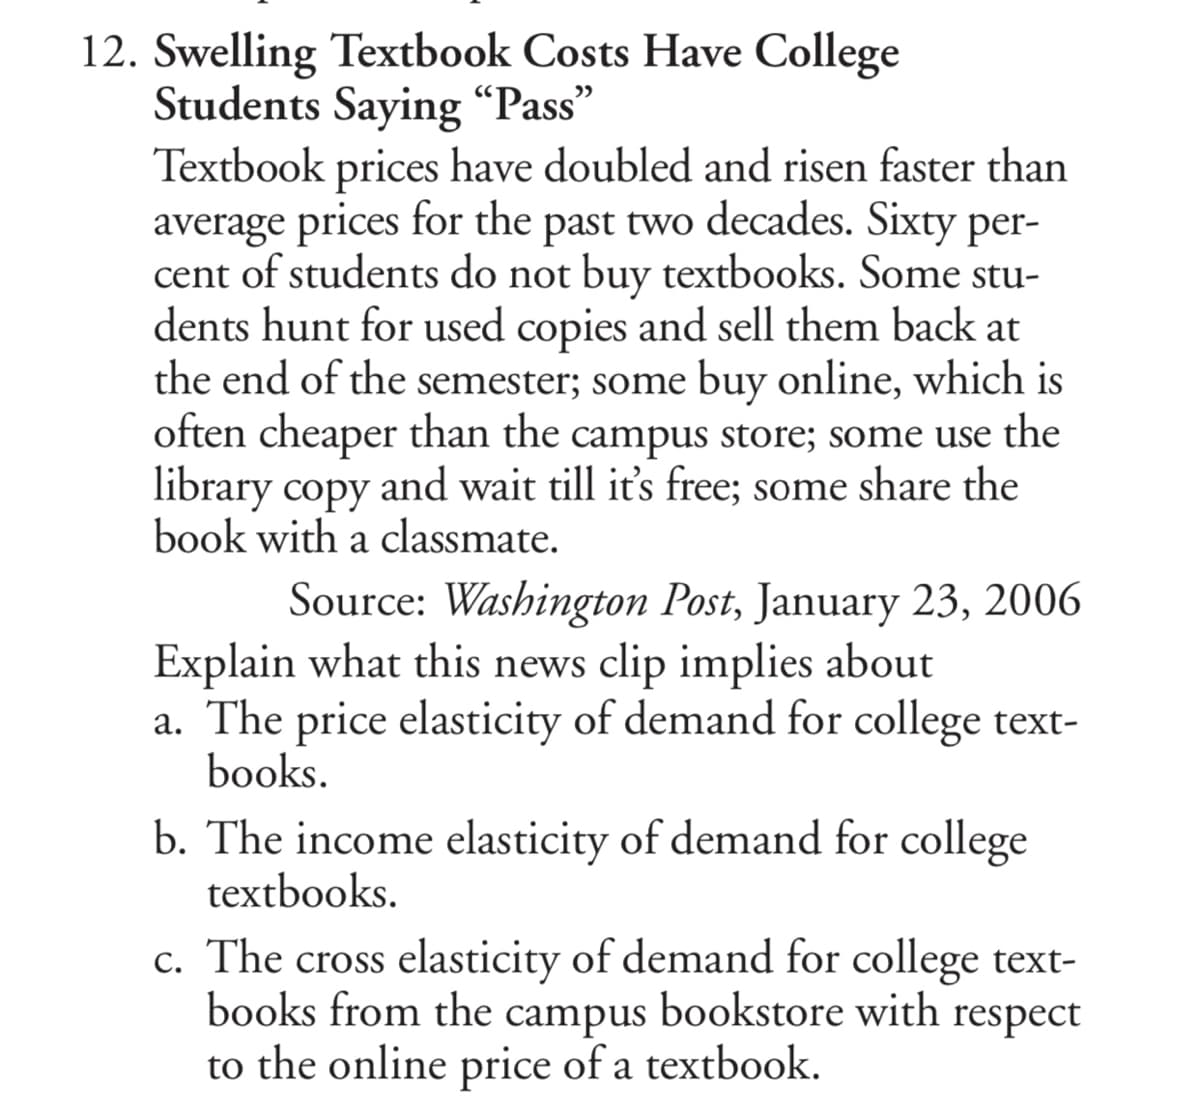 12. Swelling Textbook Costs Have College
Students Saying “Pass"
Textbook prices have doubled and risen faster than
average prices for the past two decades. Sixty per-
cent of students do not buy textbooks. Some stu-
dents hunt for used copies and sell them back at
the end of the semester; some buy online, which is
often cheaper than the campus store; some use the
library copy and wait till it's free; some share the
book with a classmate.
Source: Washington Post, January 23, 2006
Explain what this news clip implies about
a. The price elasticity of demand for college text-
books.
b. The income elasticity of demand for college
textbooks.
c. The cross elasticity of demand for college text-
books from the campus bookstore with respect
to the online price of a textbook.
